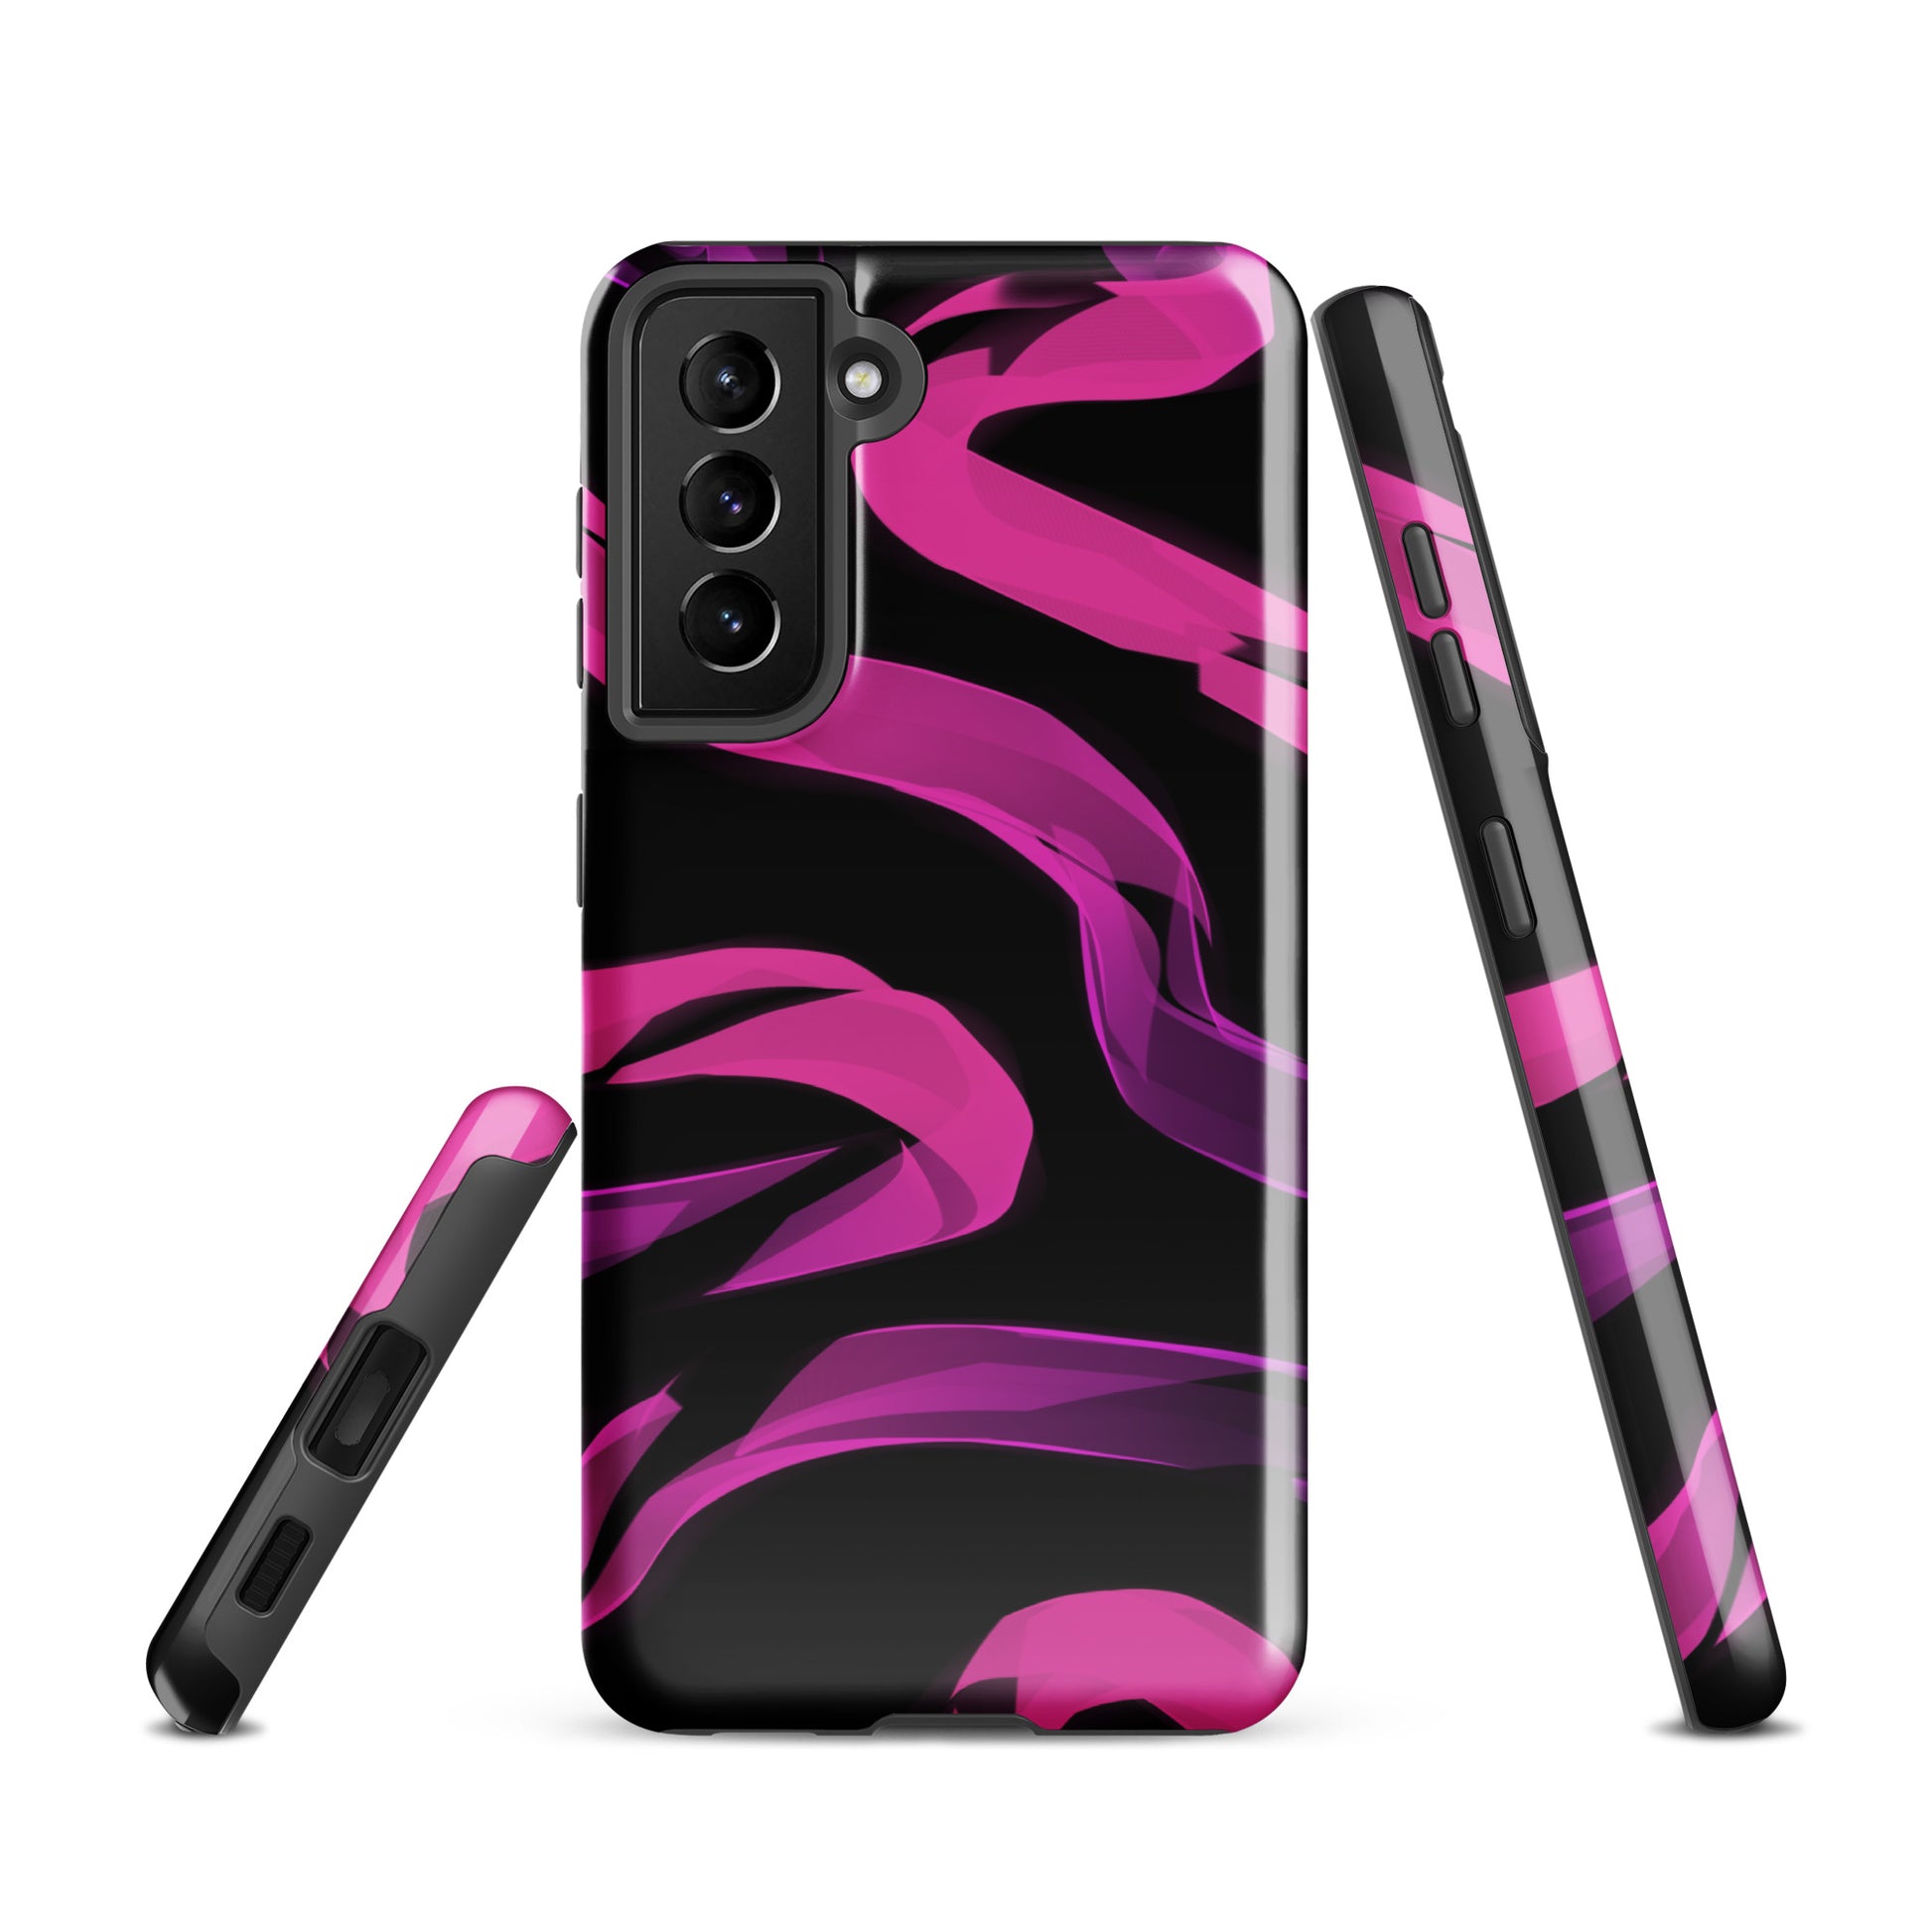 A Bright Pink Neon Sketch Case for the Samsung Galaxy S21